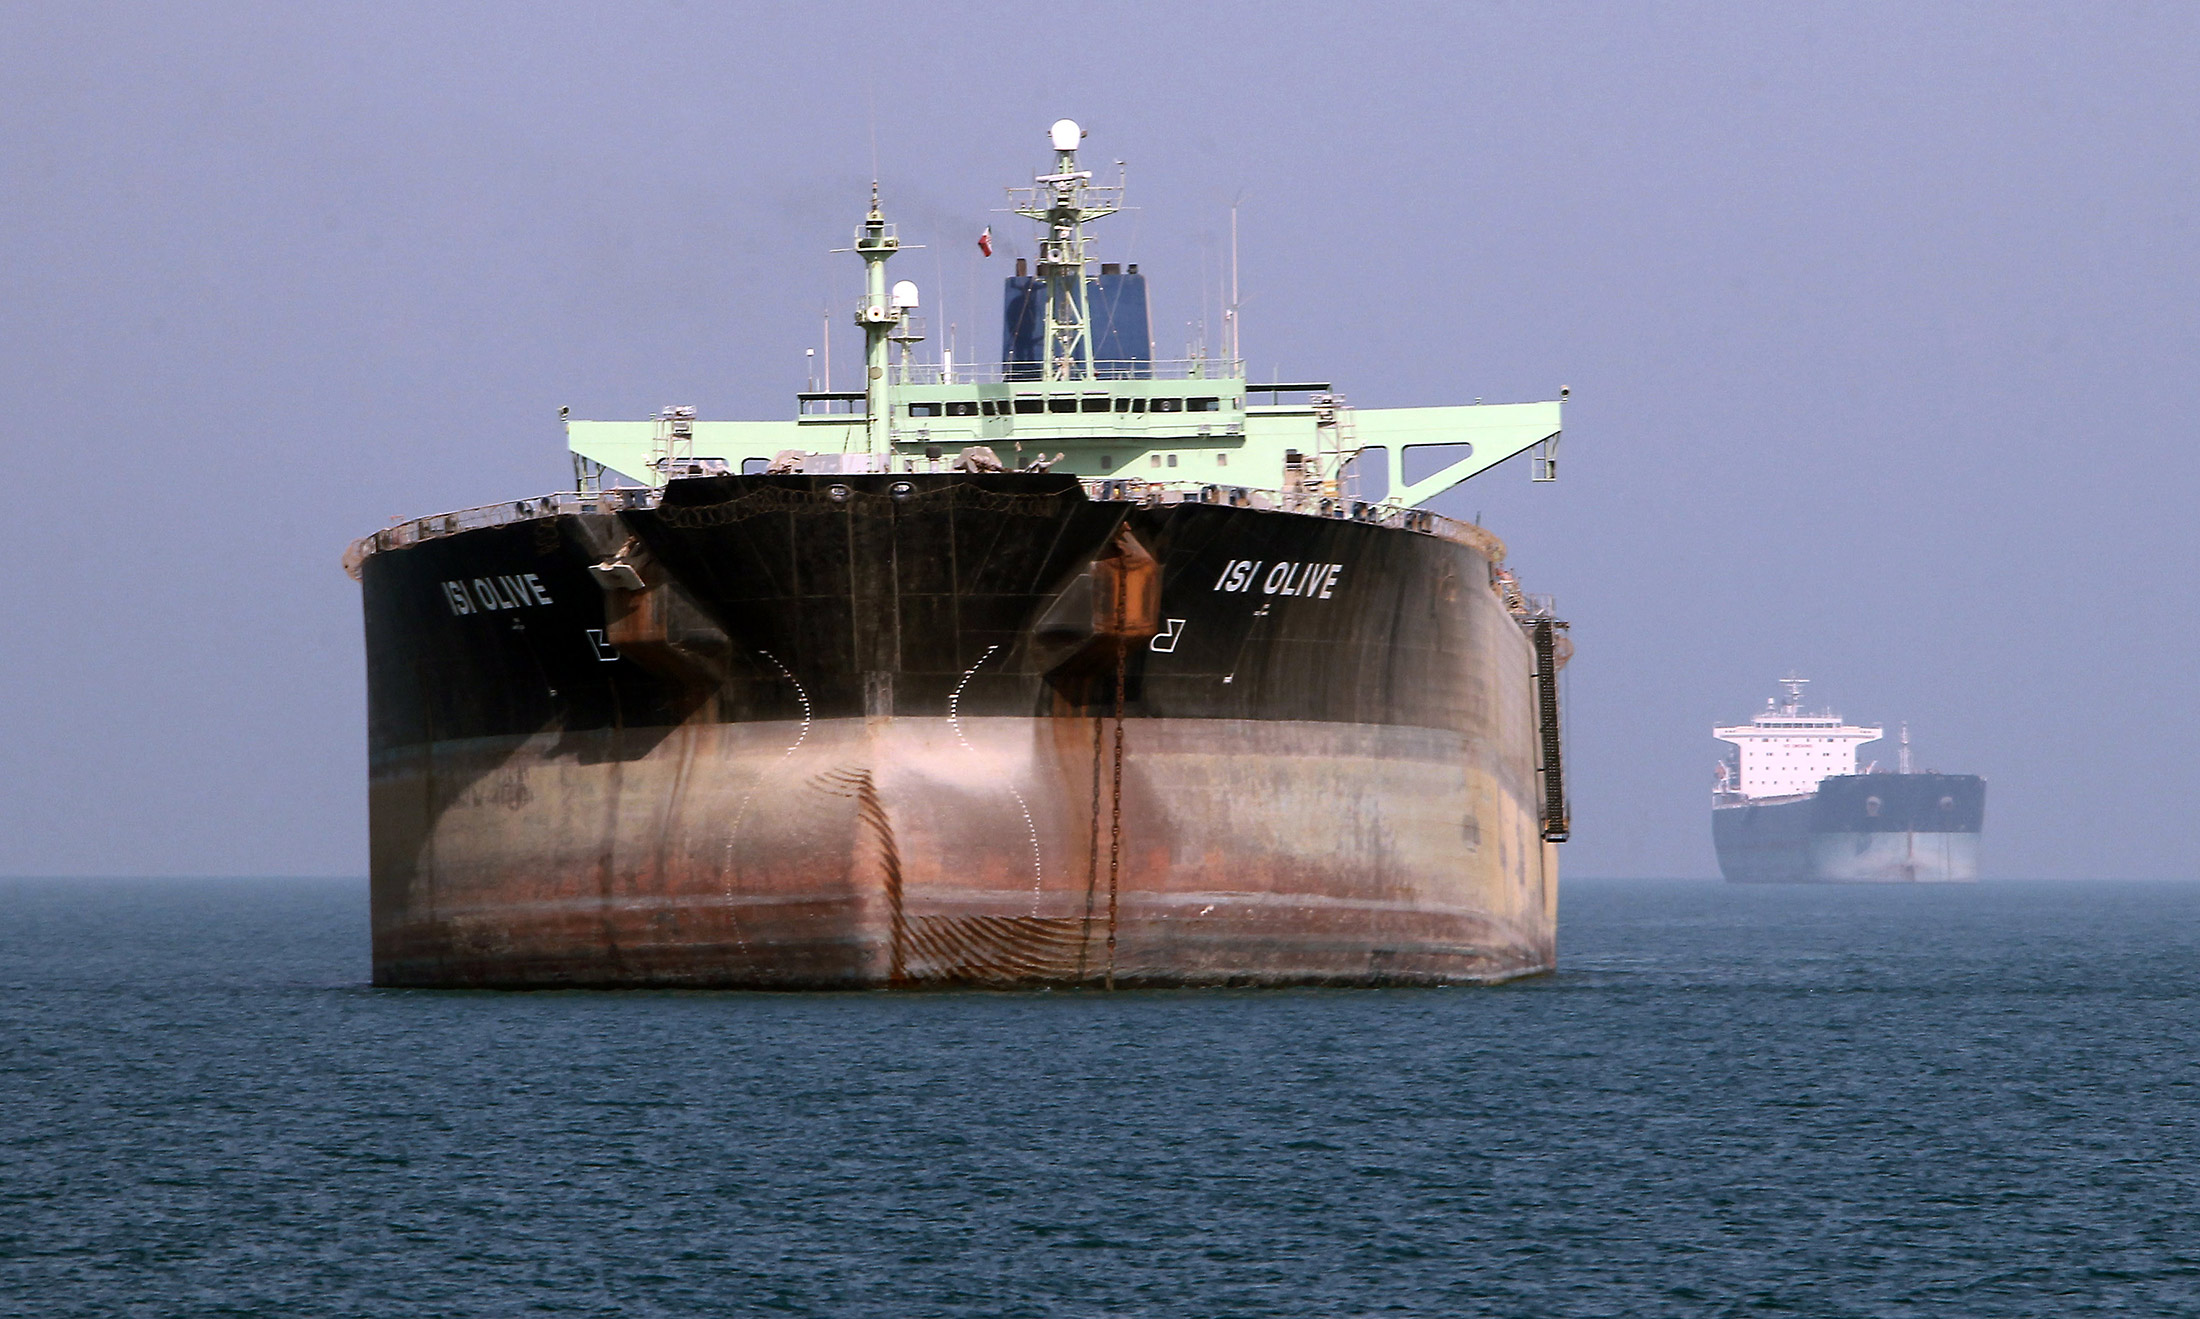 An oil tanker off the southern coast of Iran in 2012.
